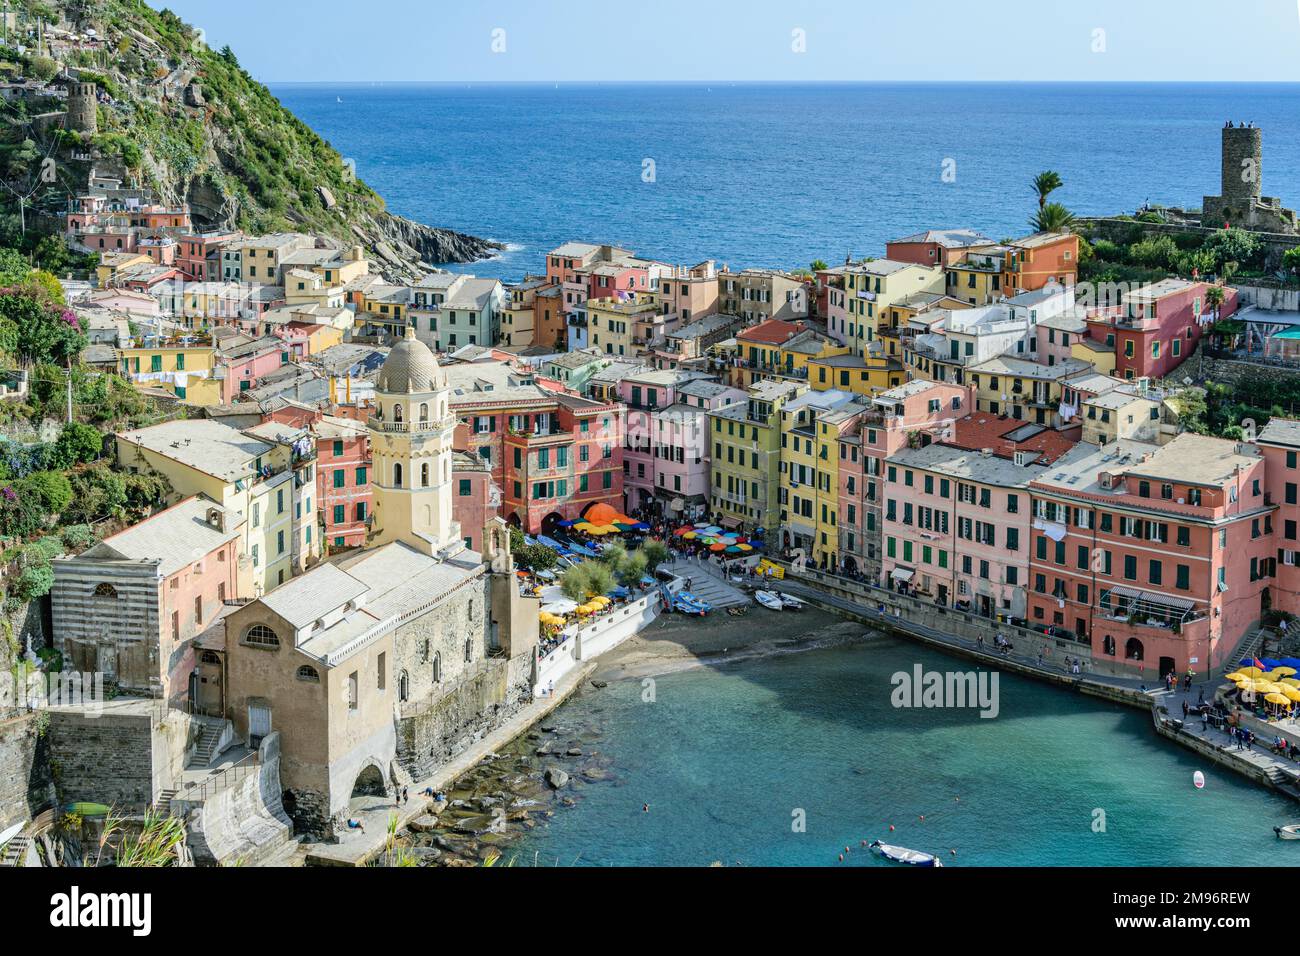 Vernazza, a cliff-side fishing port on the Cinque Terra, Italy Stock Photo